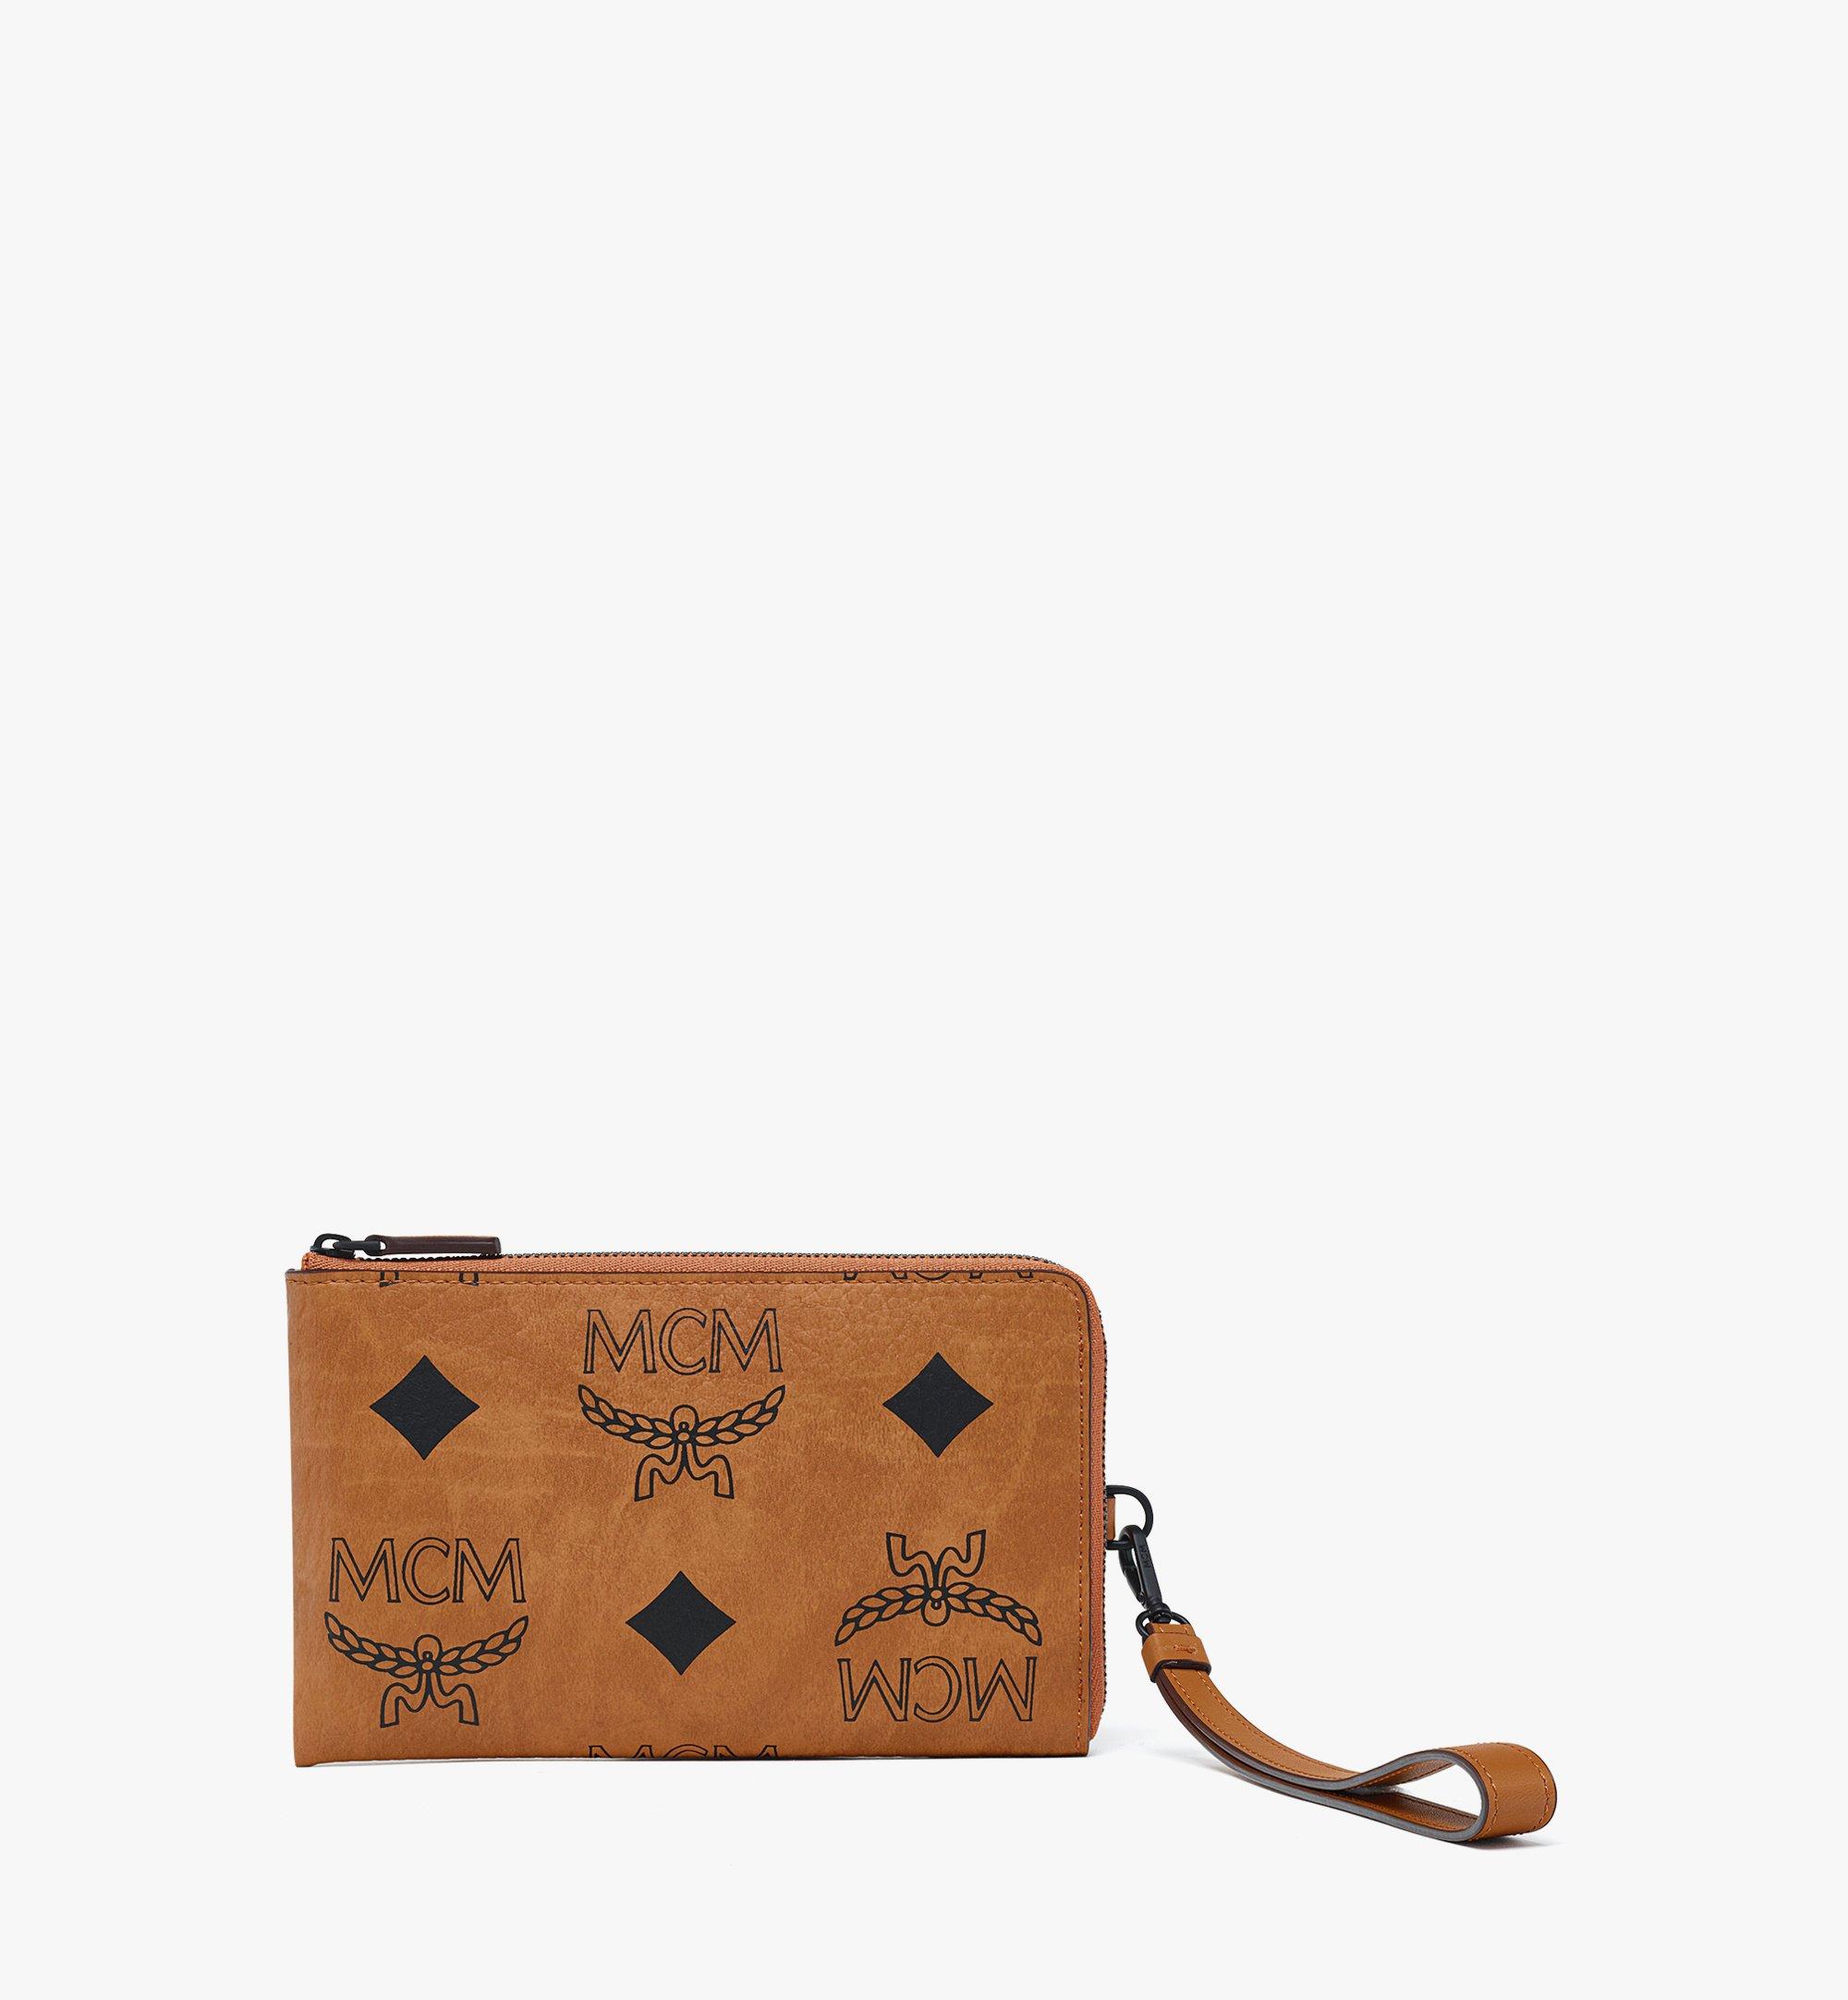 MCM Women's Travel Bags | Luxury Leather Bags & Luggage | MCM® China